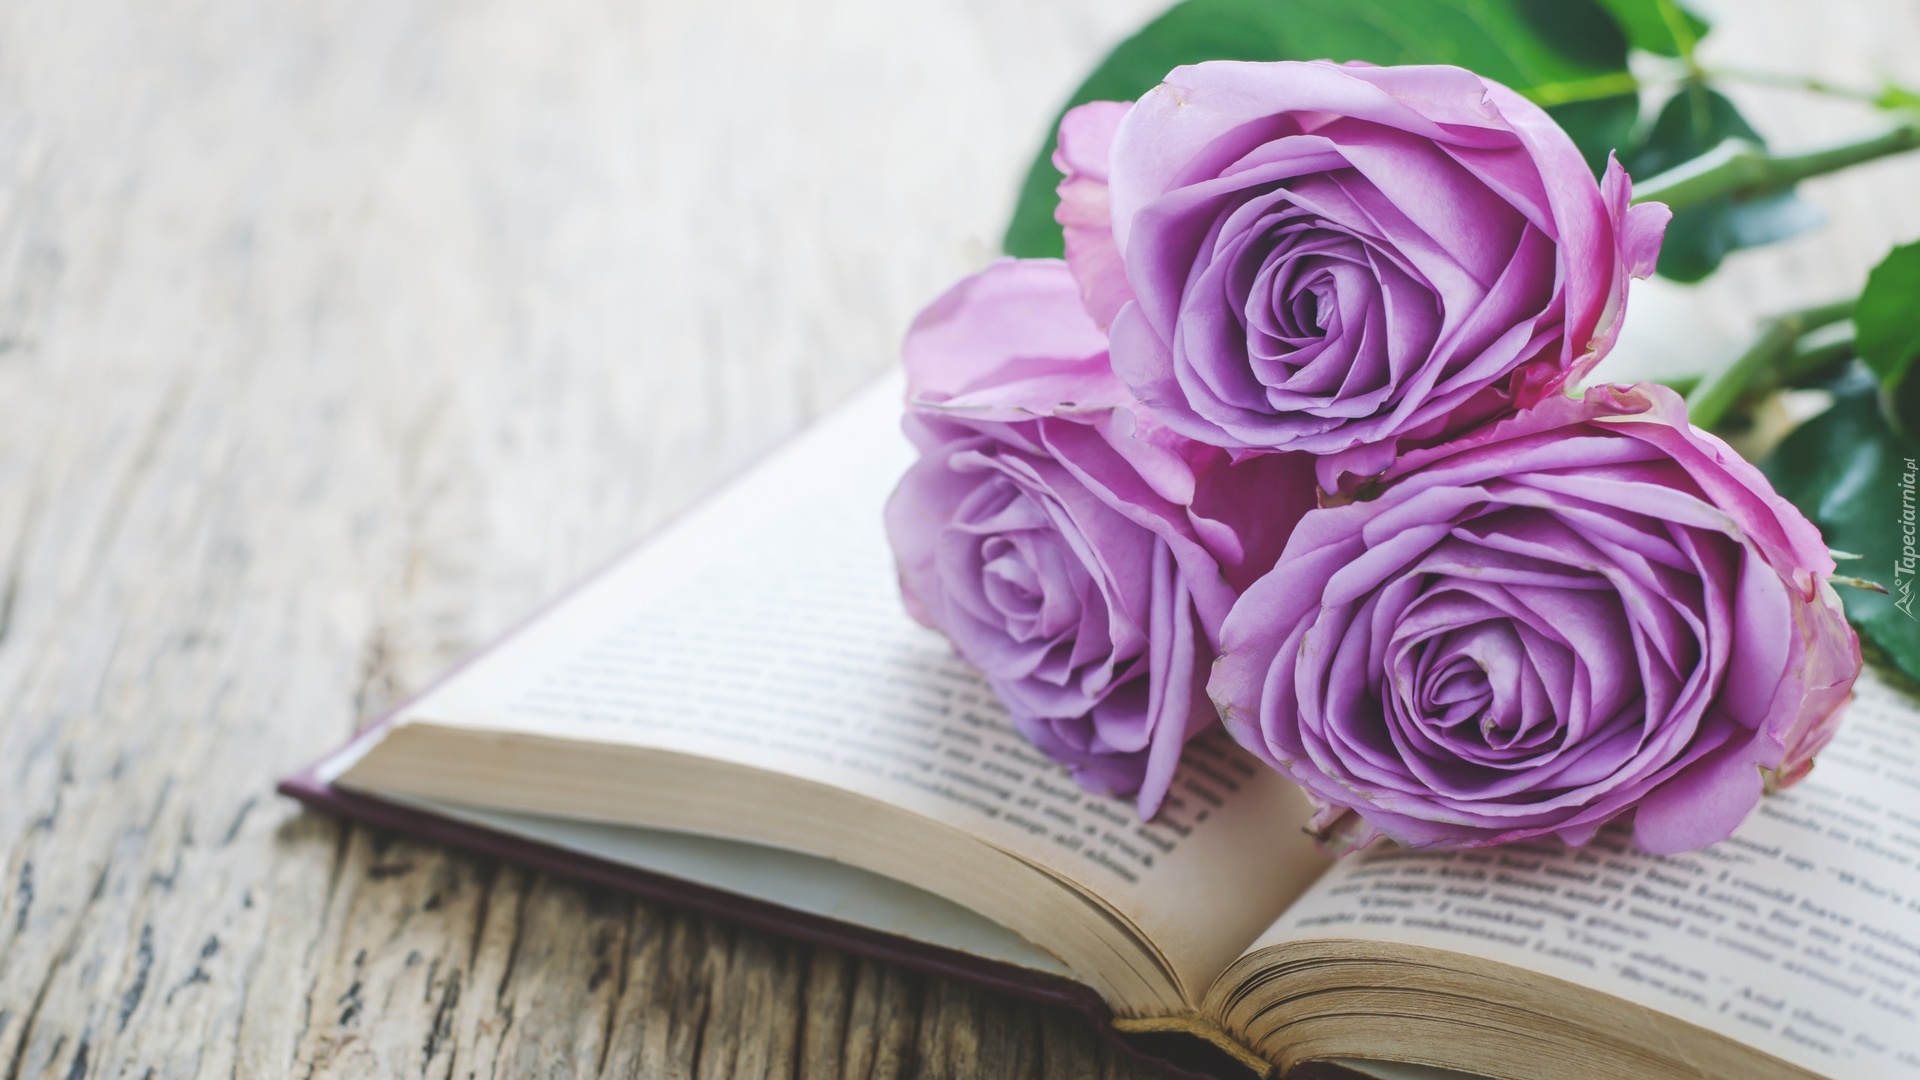 Book And Flower Image